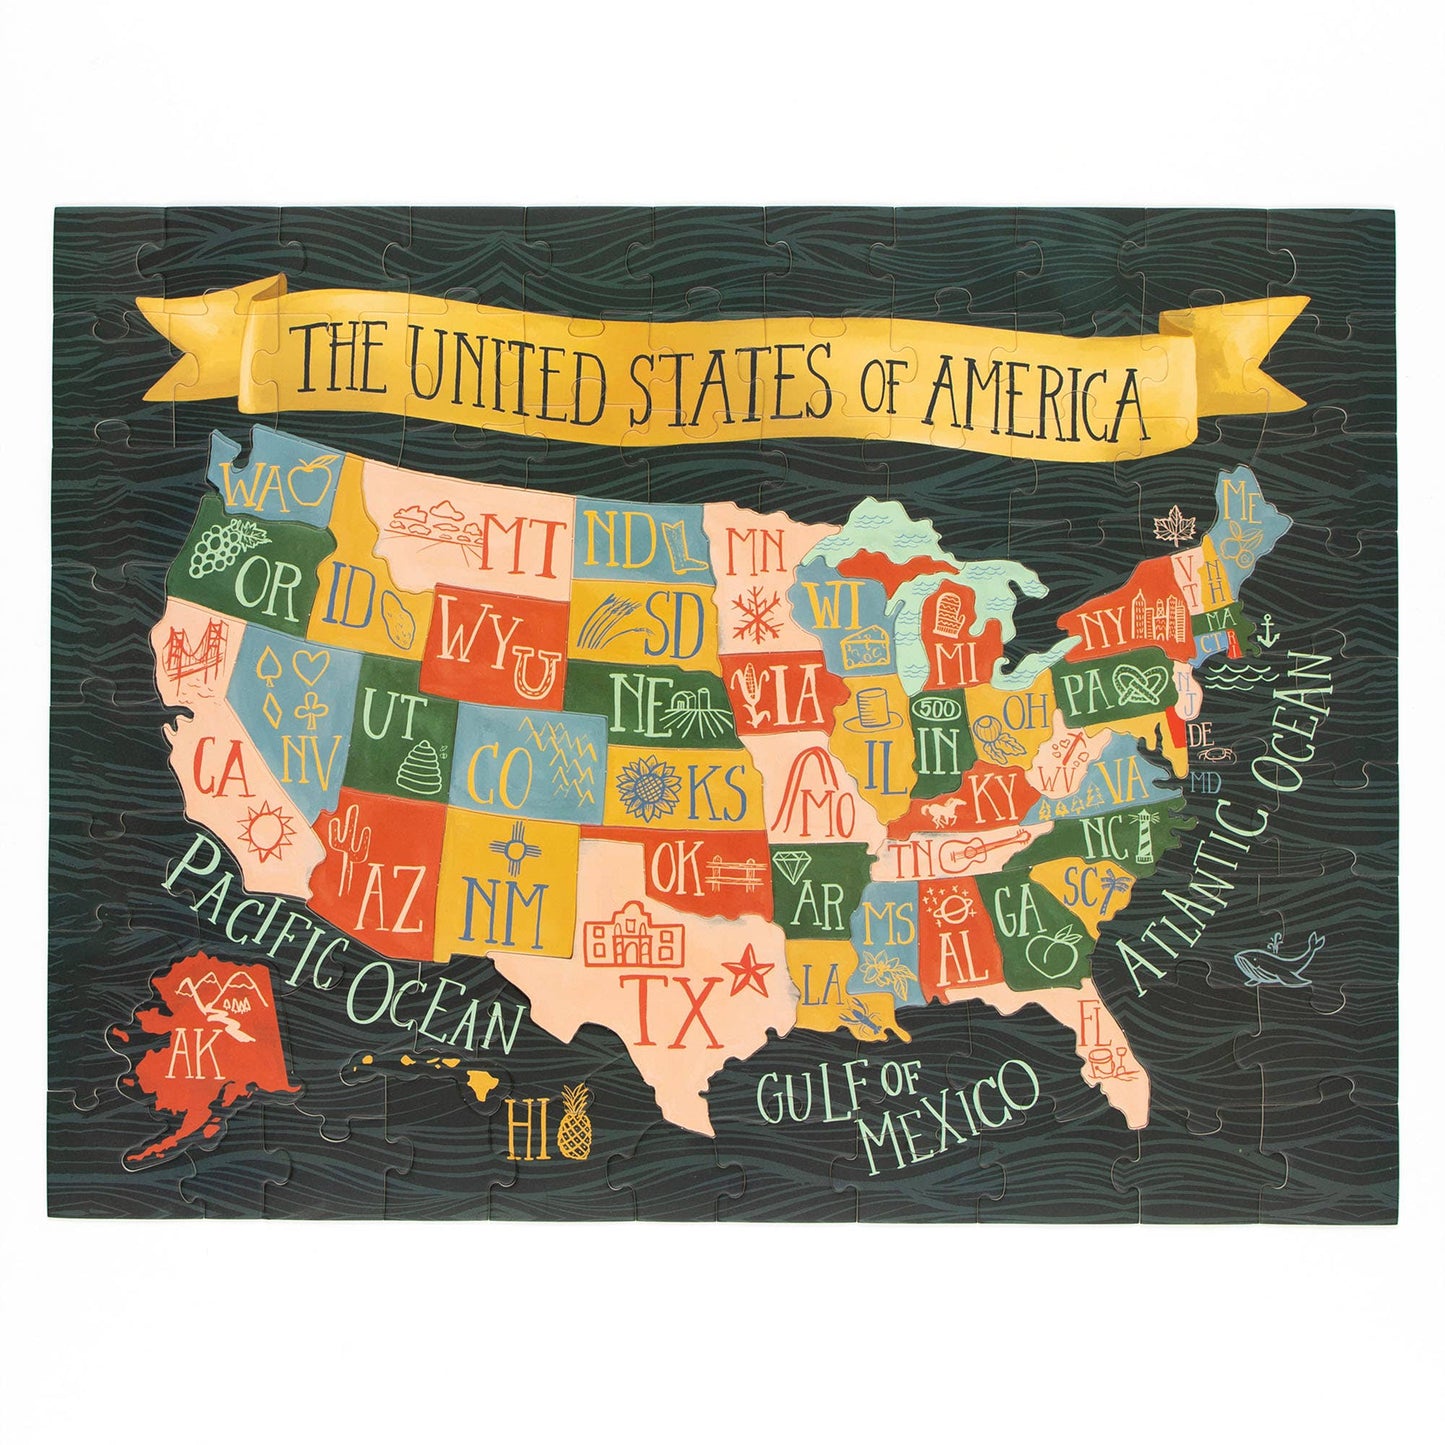 The United States of America - 110 Piece Kids Jigsaw Puzzle